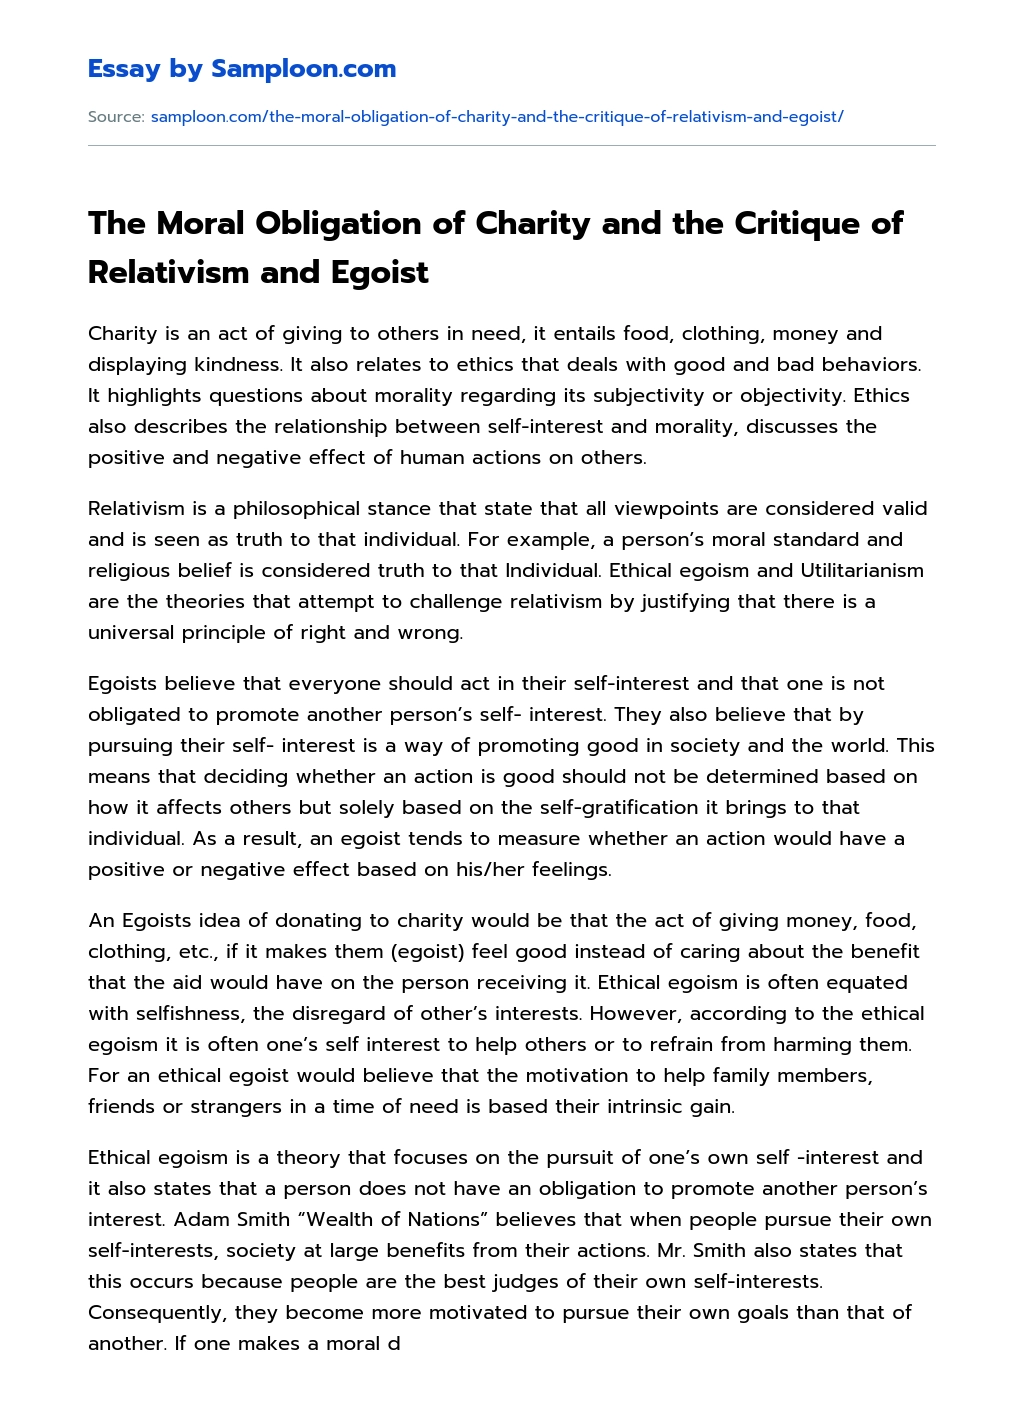 The Moral Obligation of Charity and the Critique of Relativism and Egoist essay